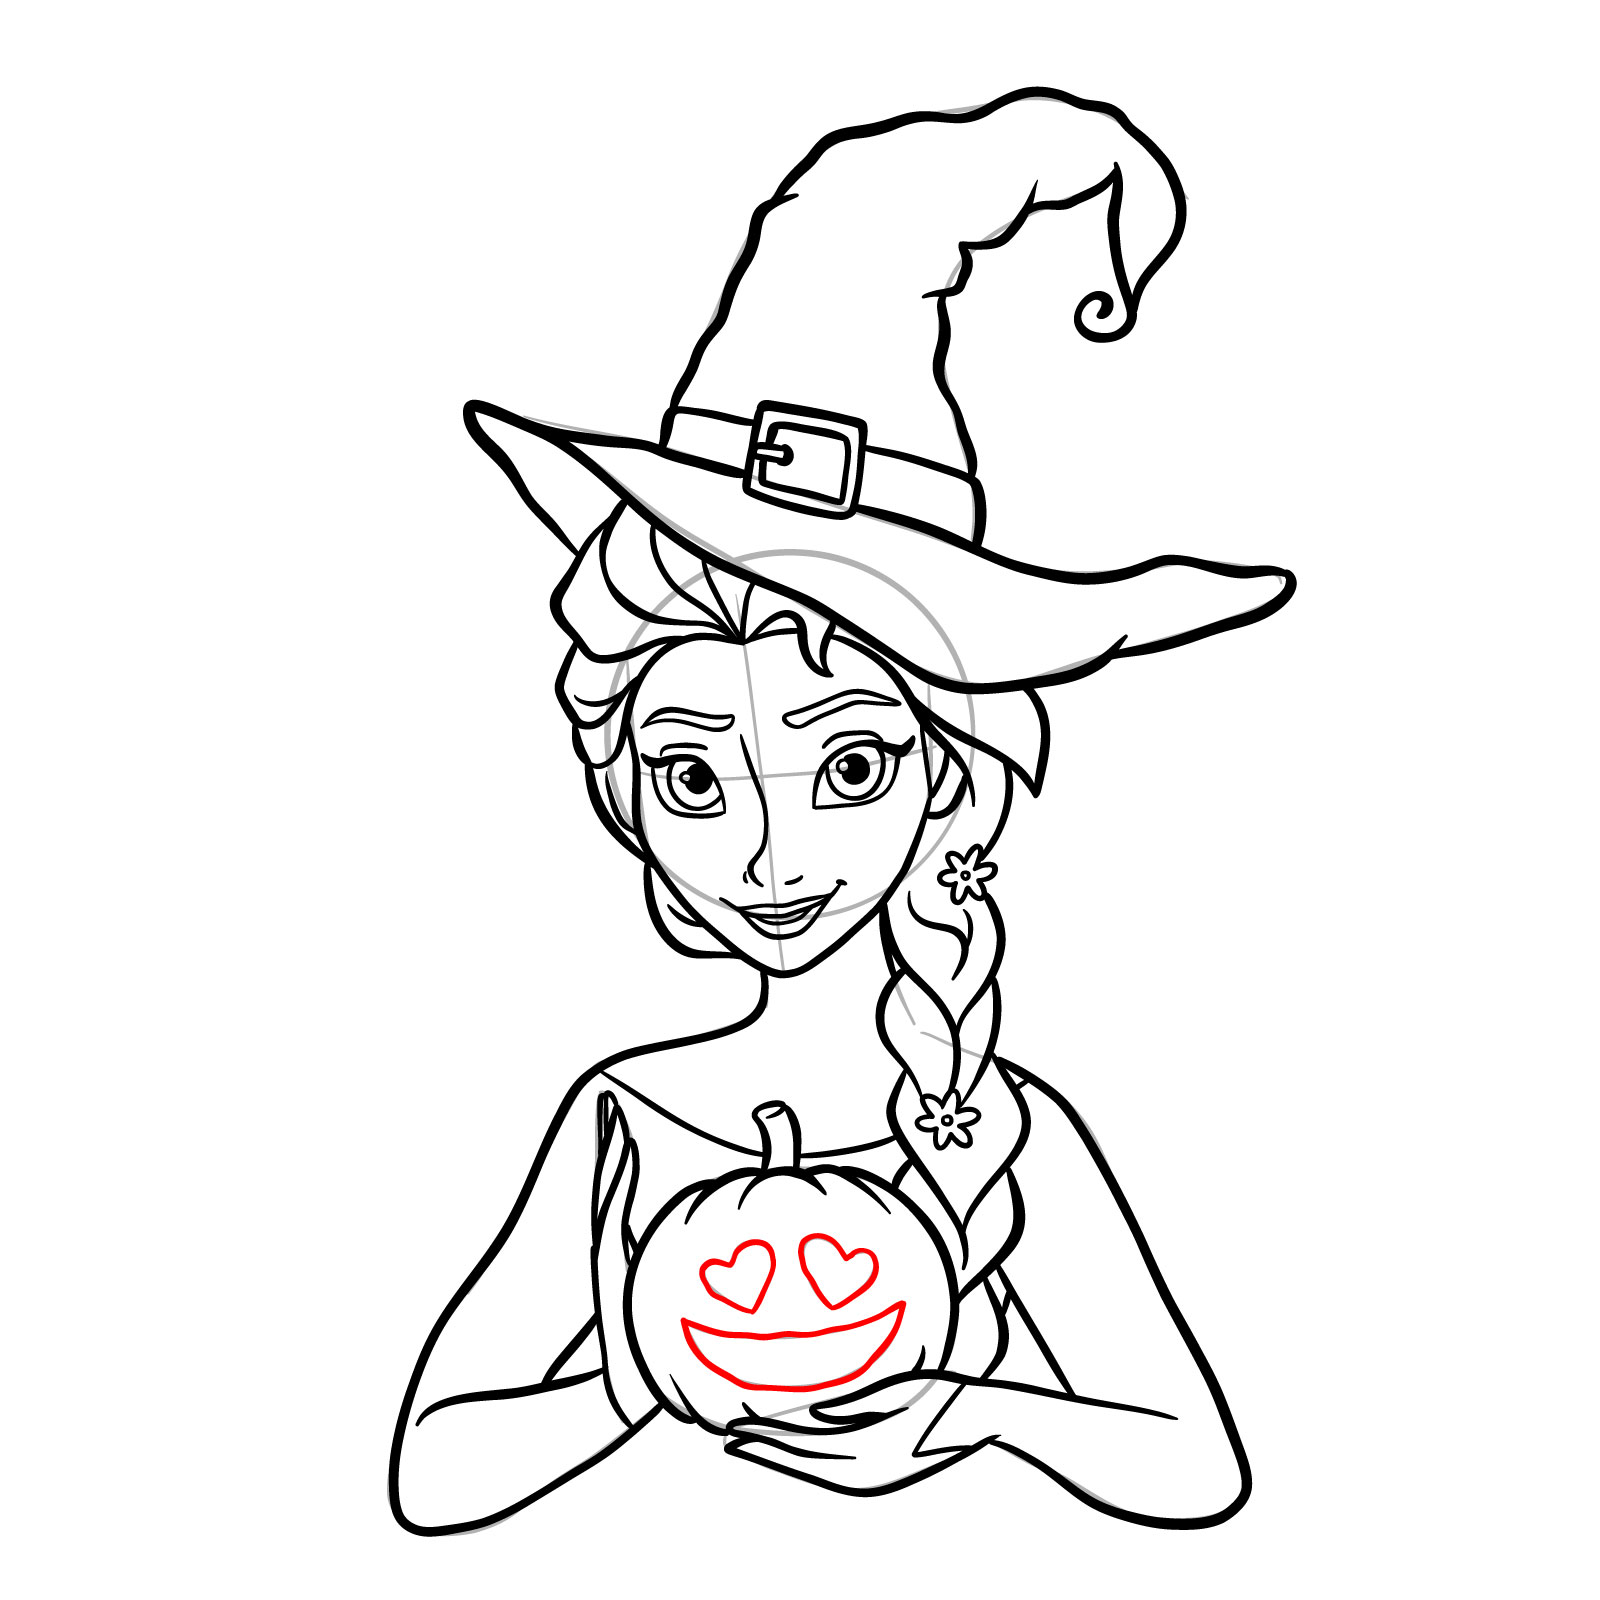 How to Draw Witch Elsa on Halloween - step 31